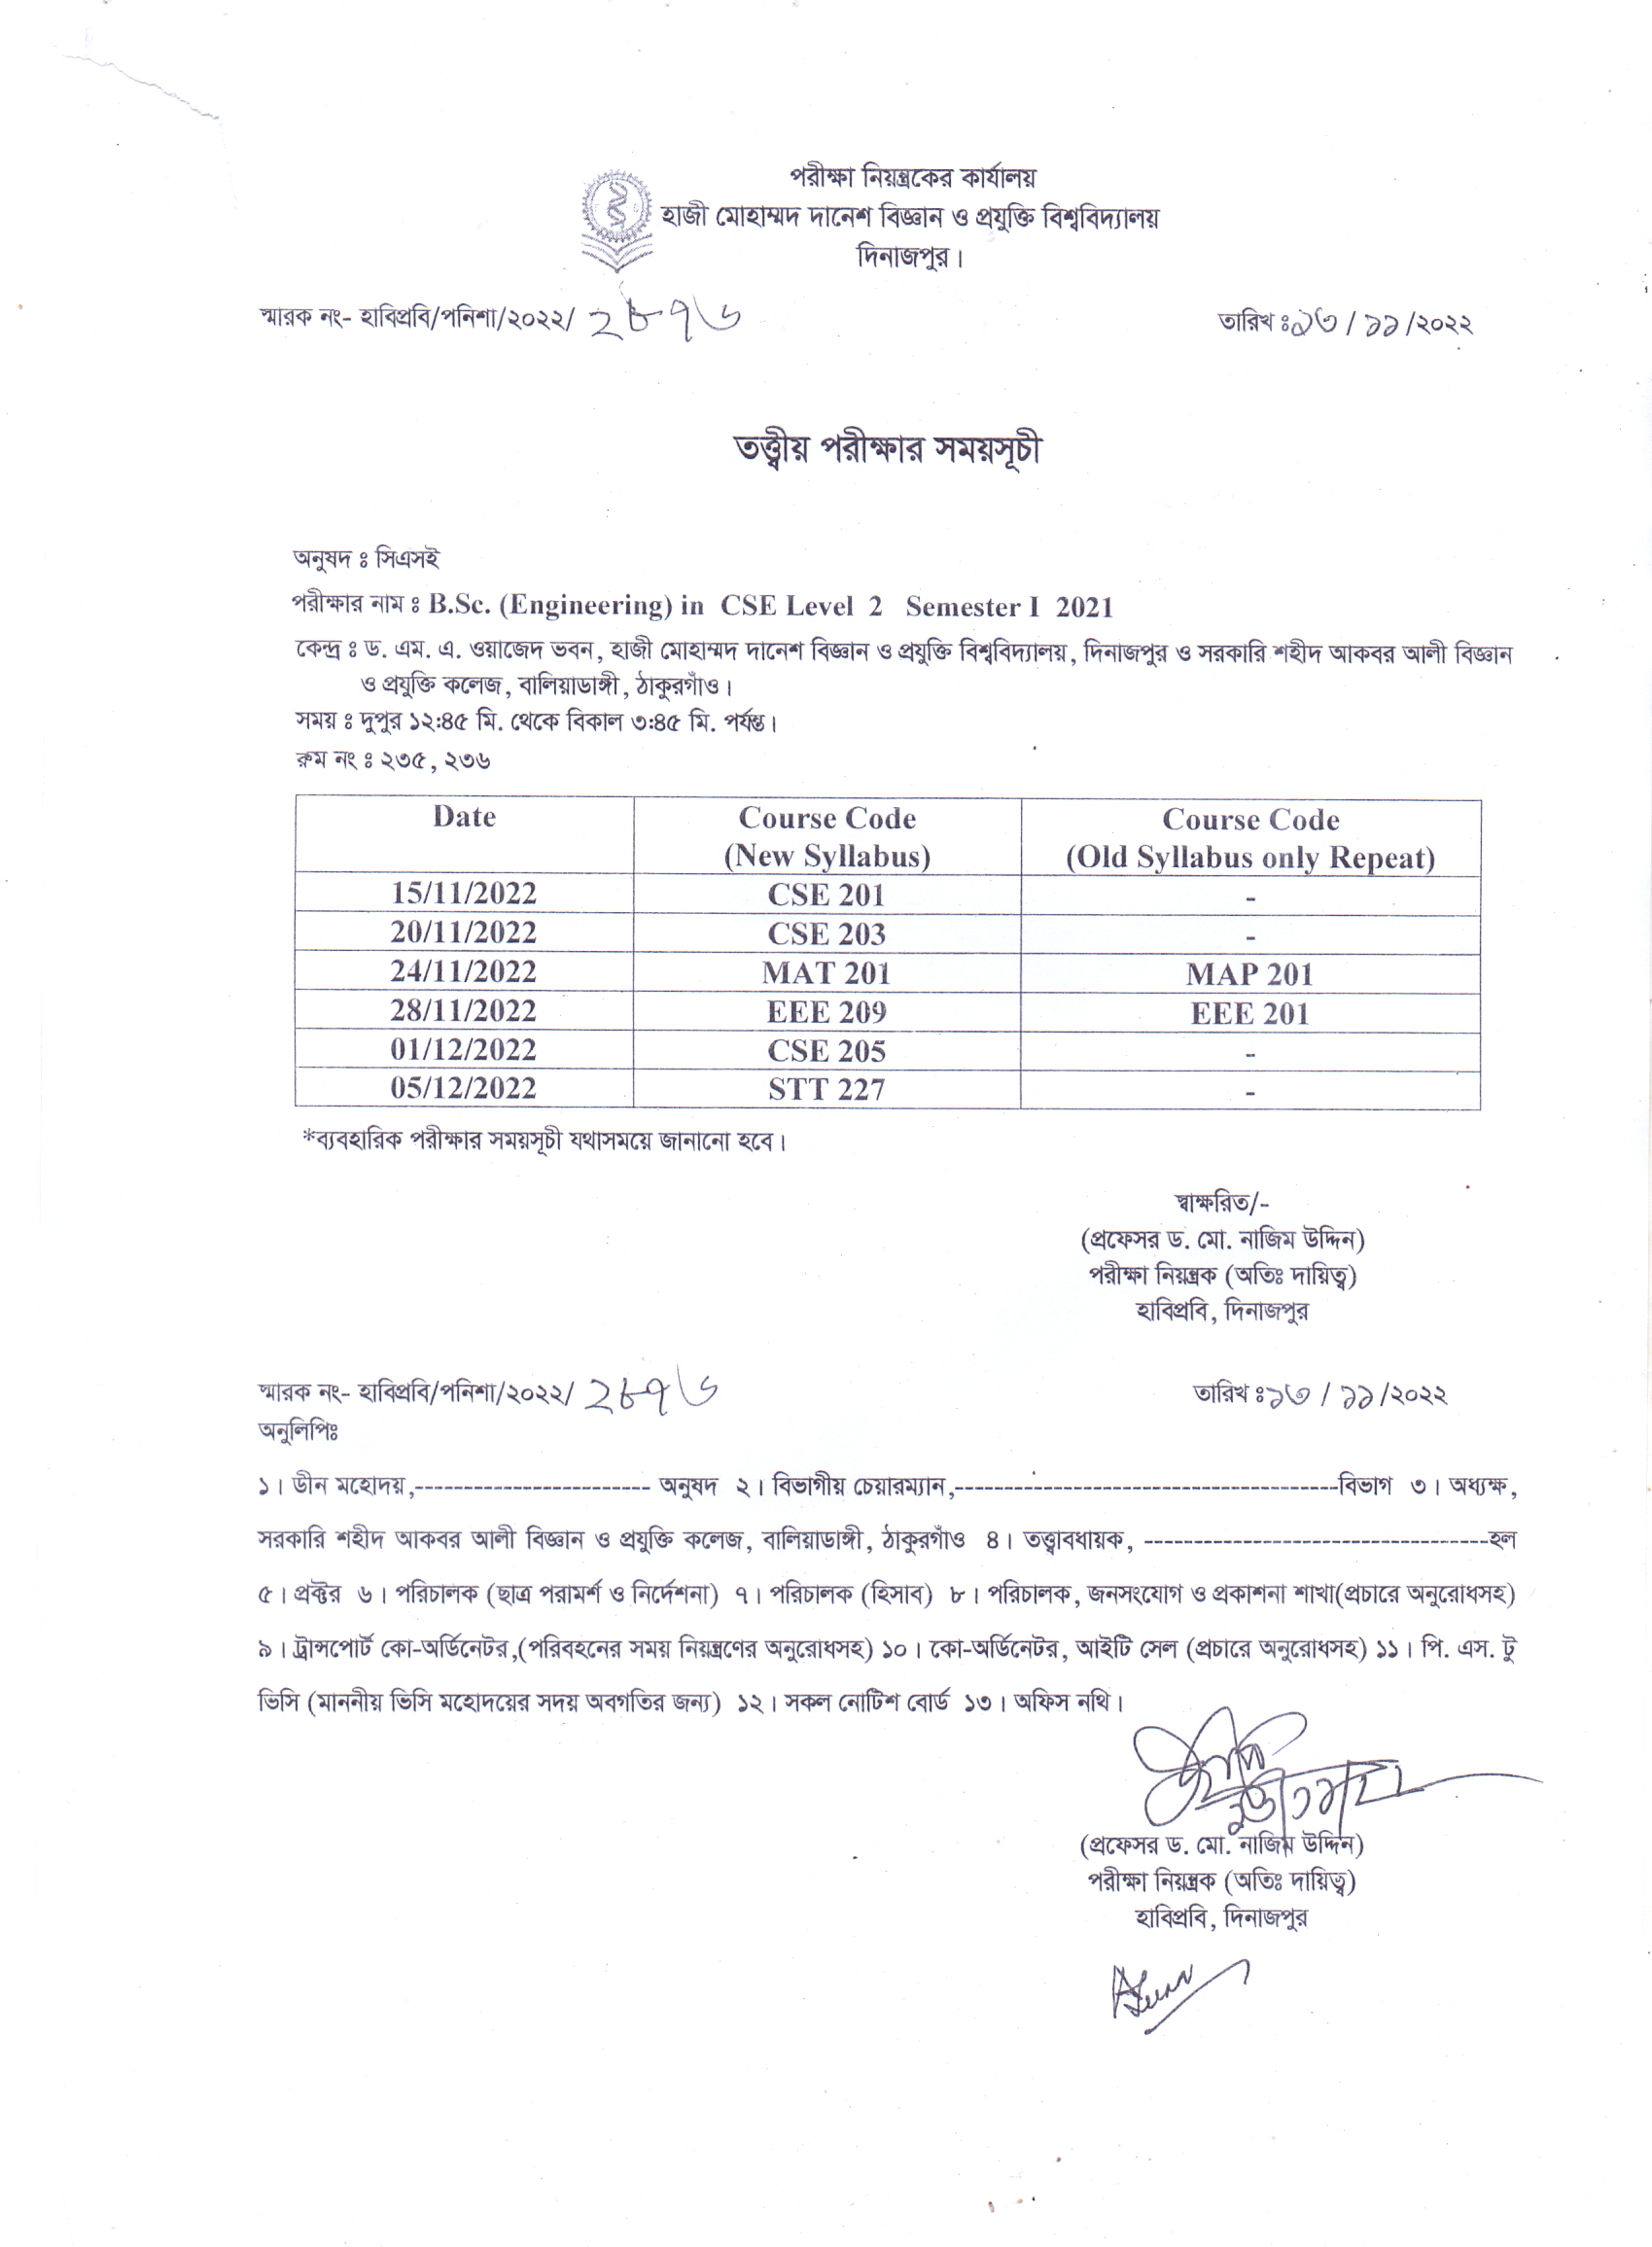  B. Sc.(Engineering) in CSE  Level 2 Semester I 2021 Final Examination Schedule